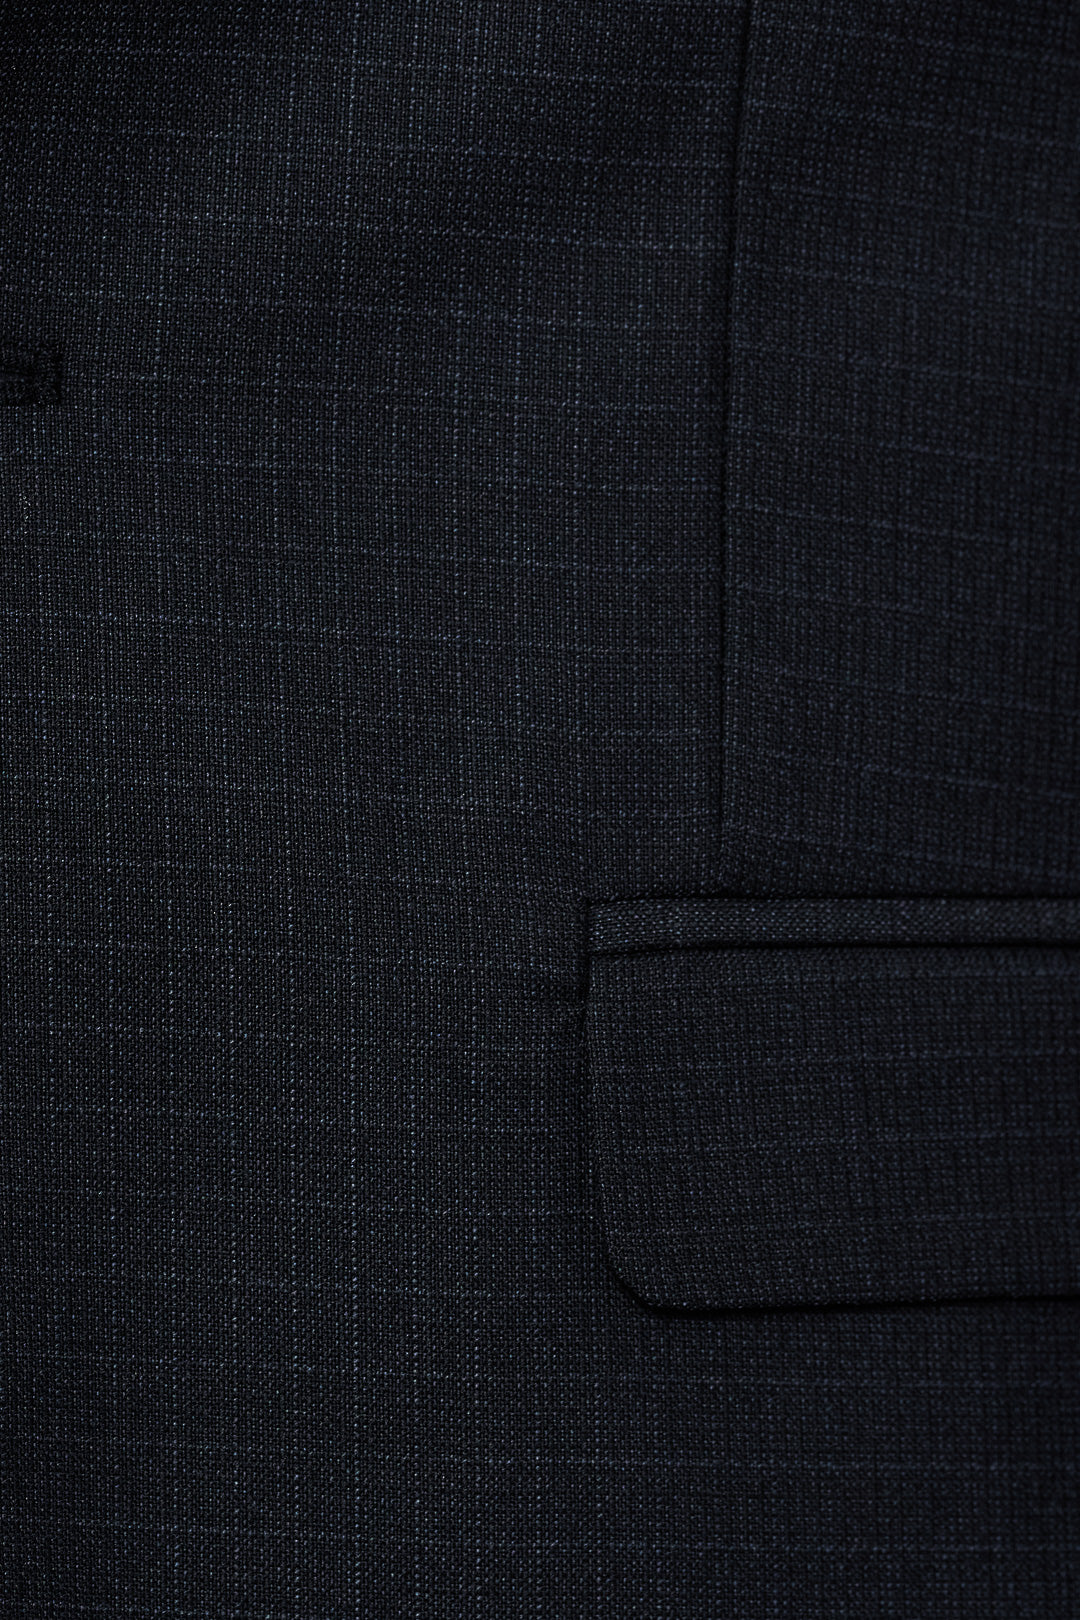 Gray Check  Patterned Suit